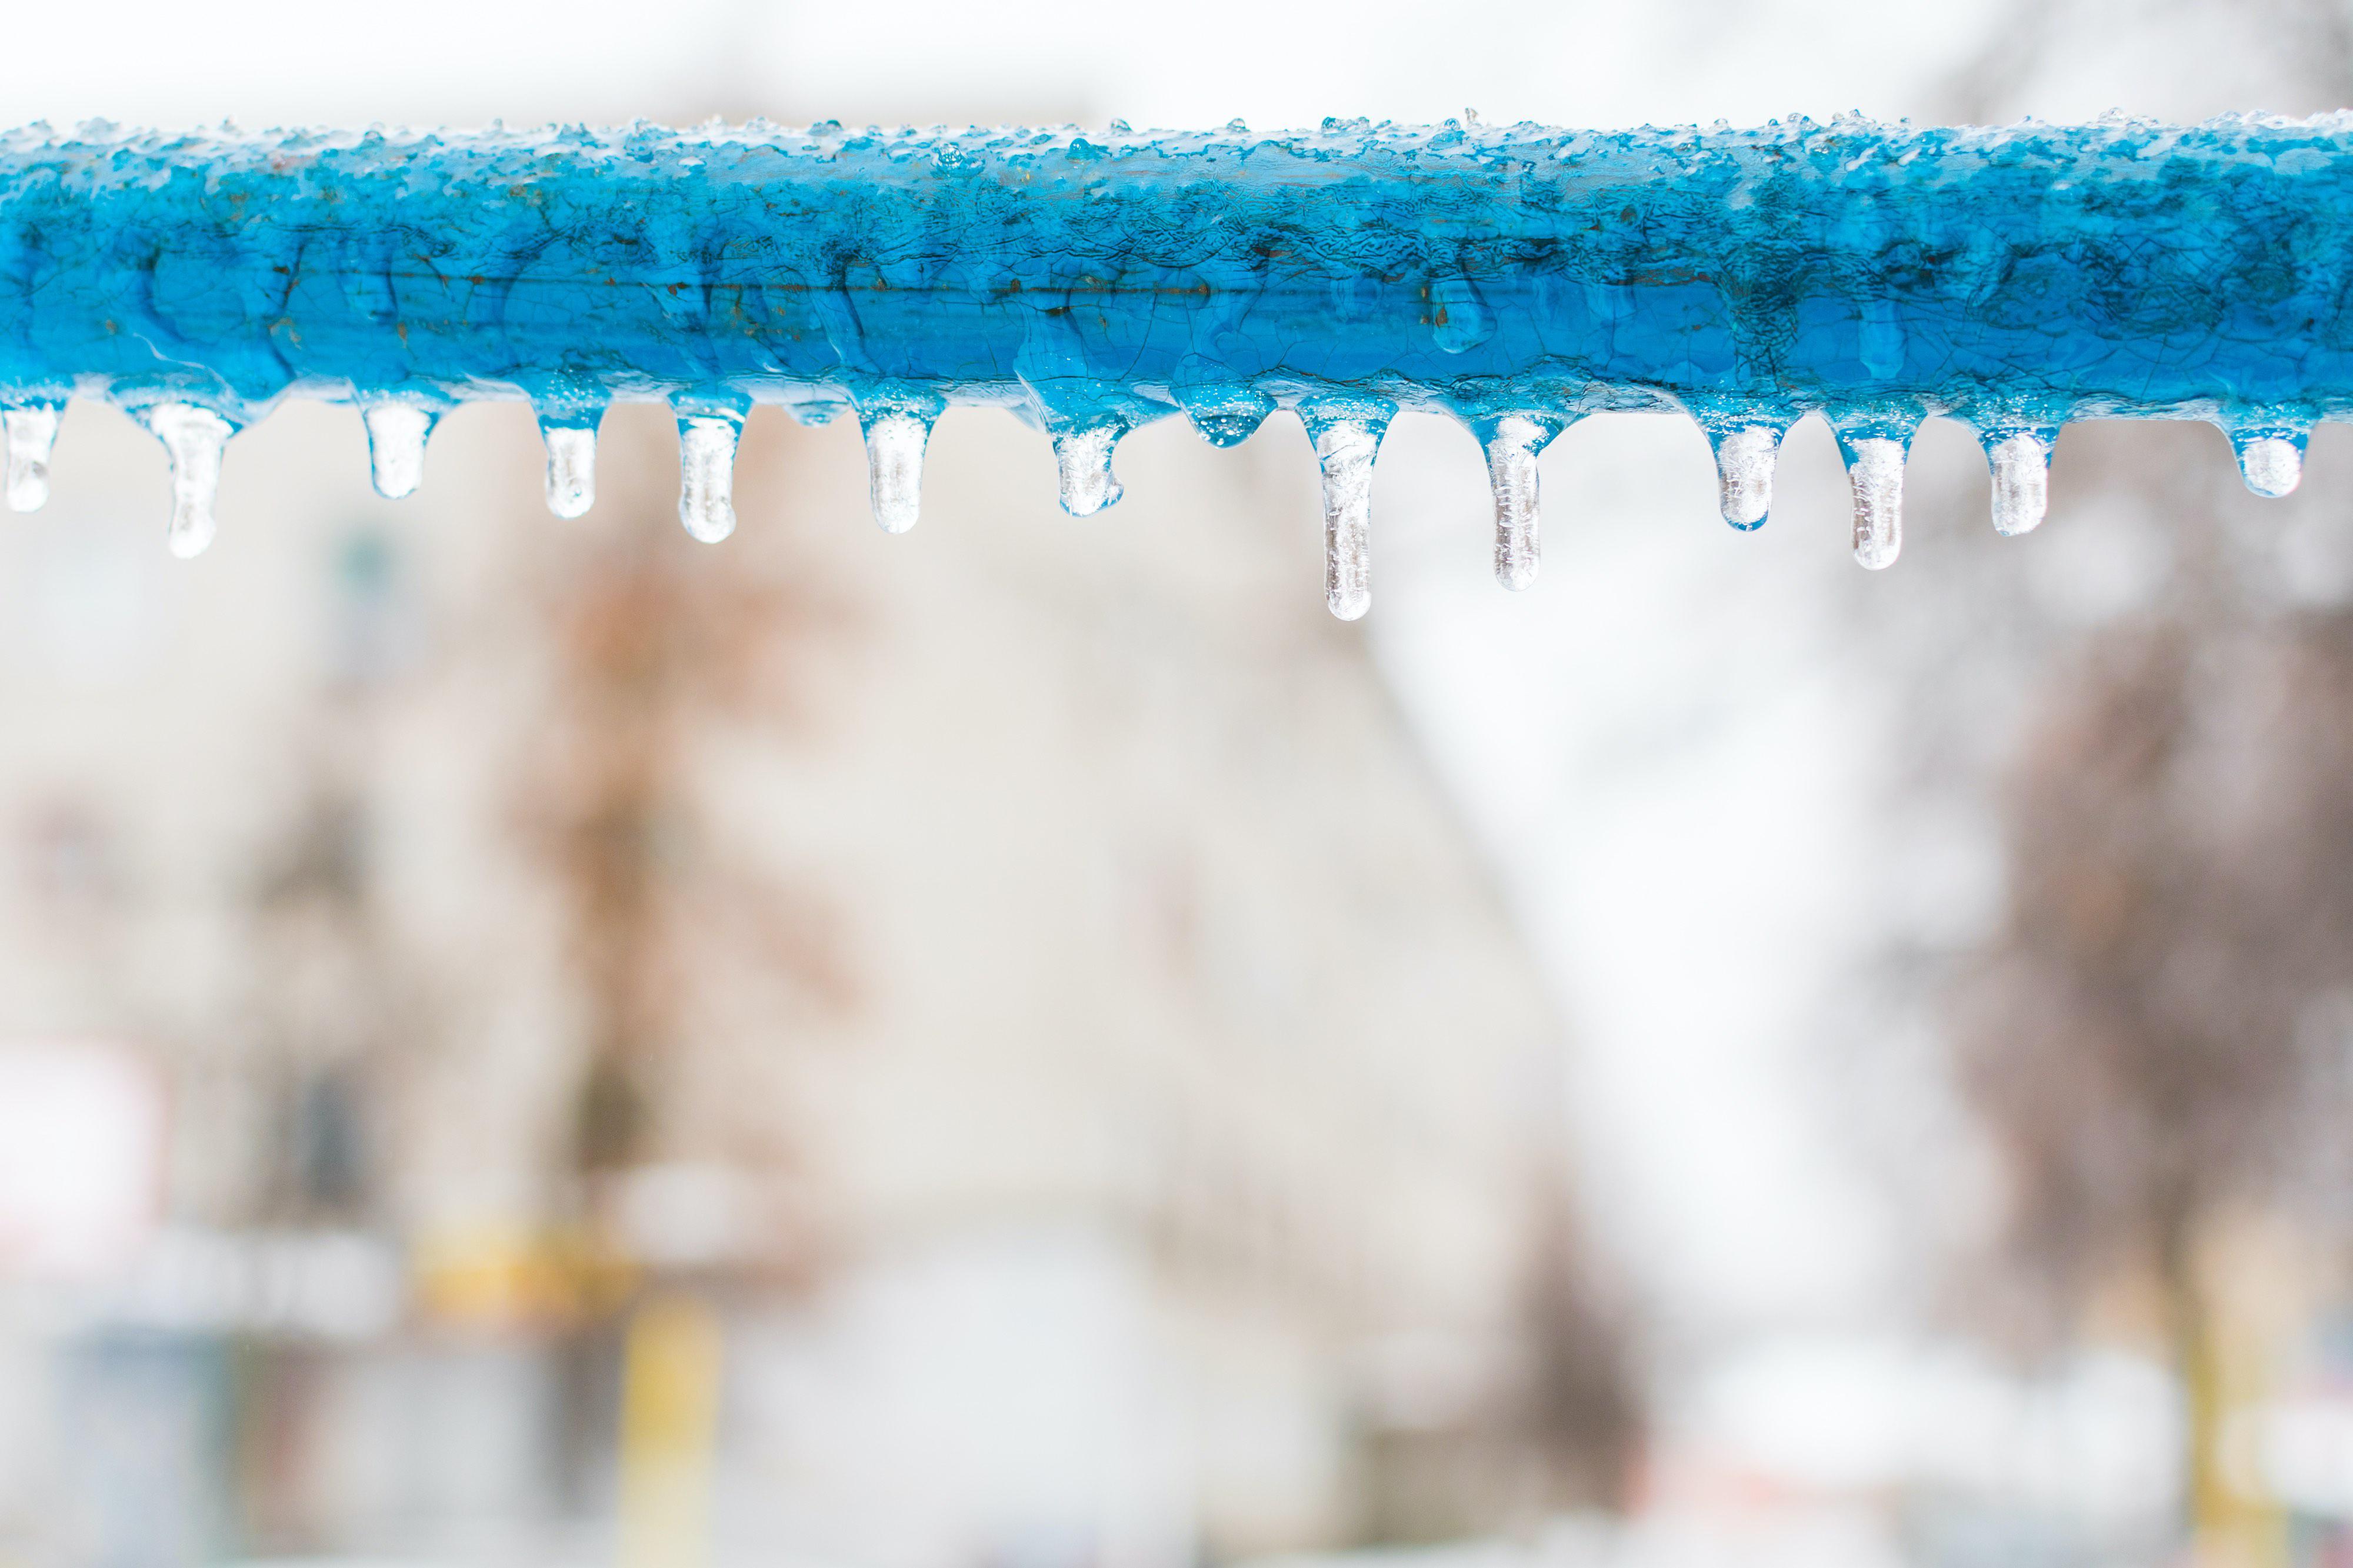 Frozen pipes cause widespread water damage throughout properties every year. If you suspect frozen pipes in your home, contact SERVPRO of St. Louis County Northwest.